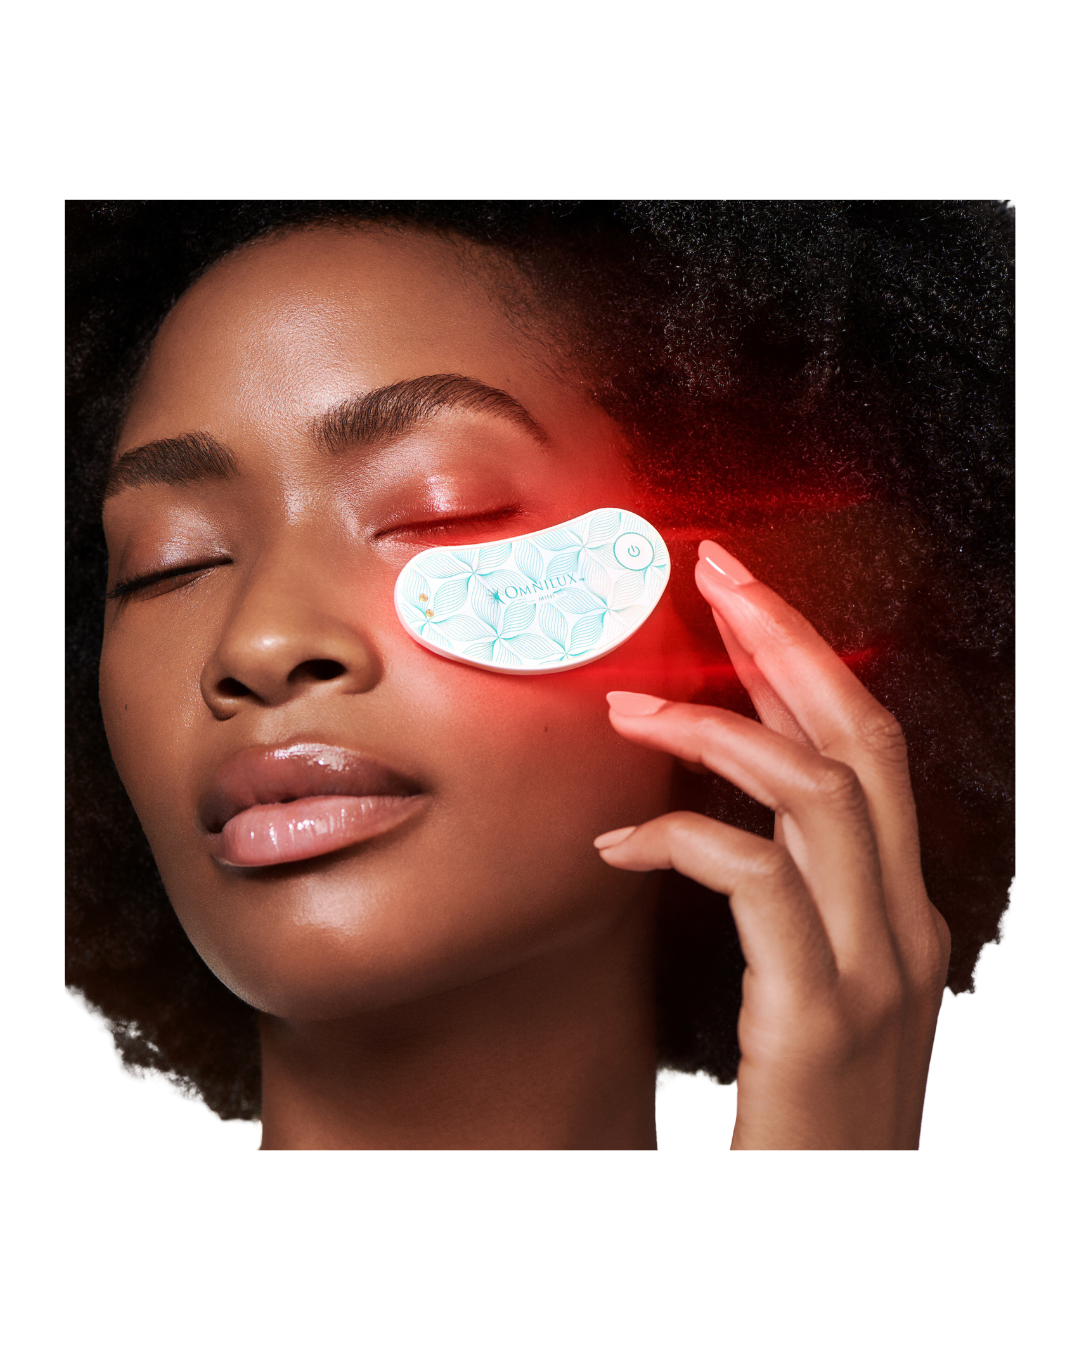 Omnilux Mini Eye Brightener LED Therapy Device